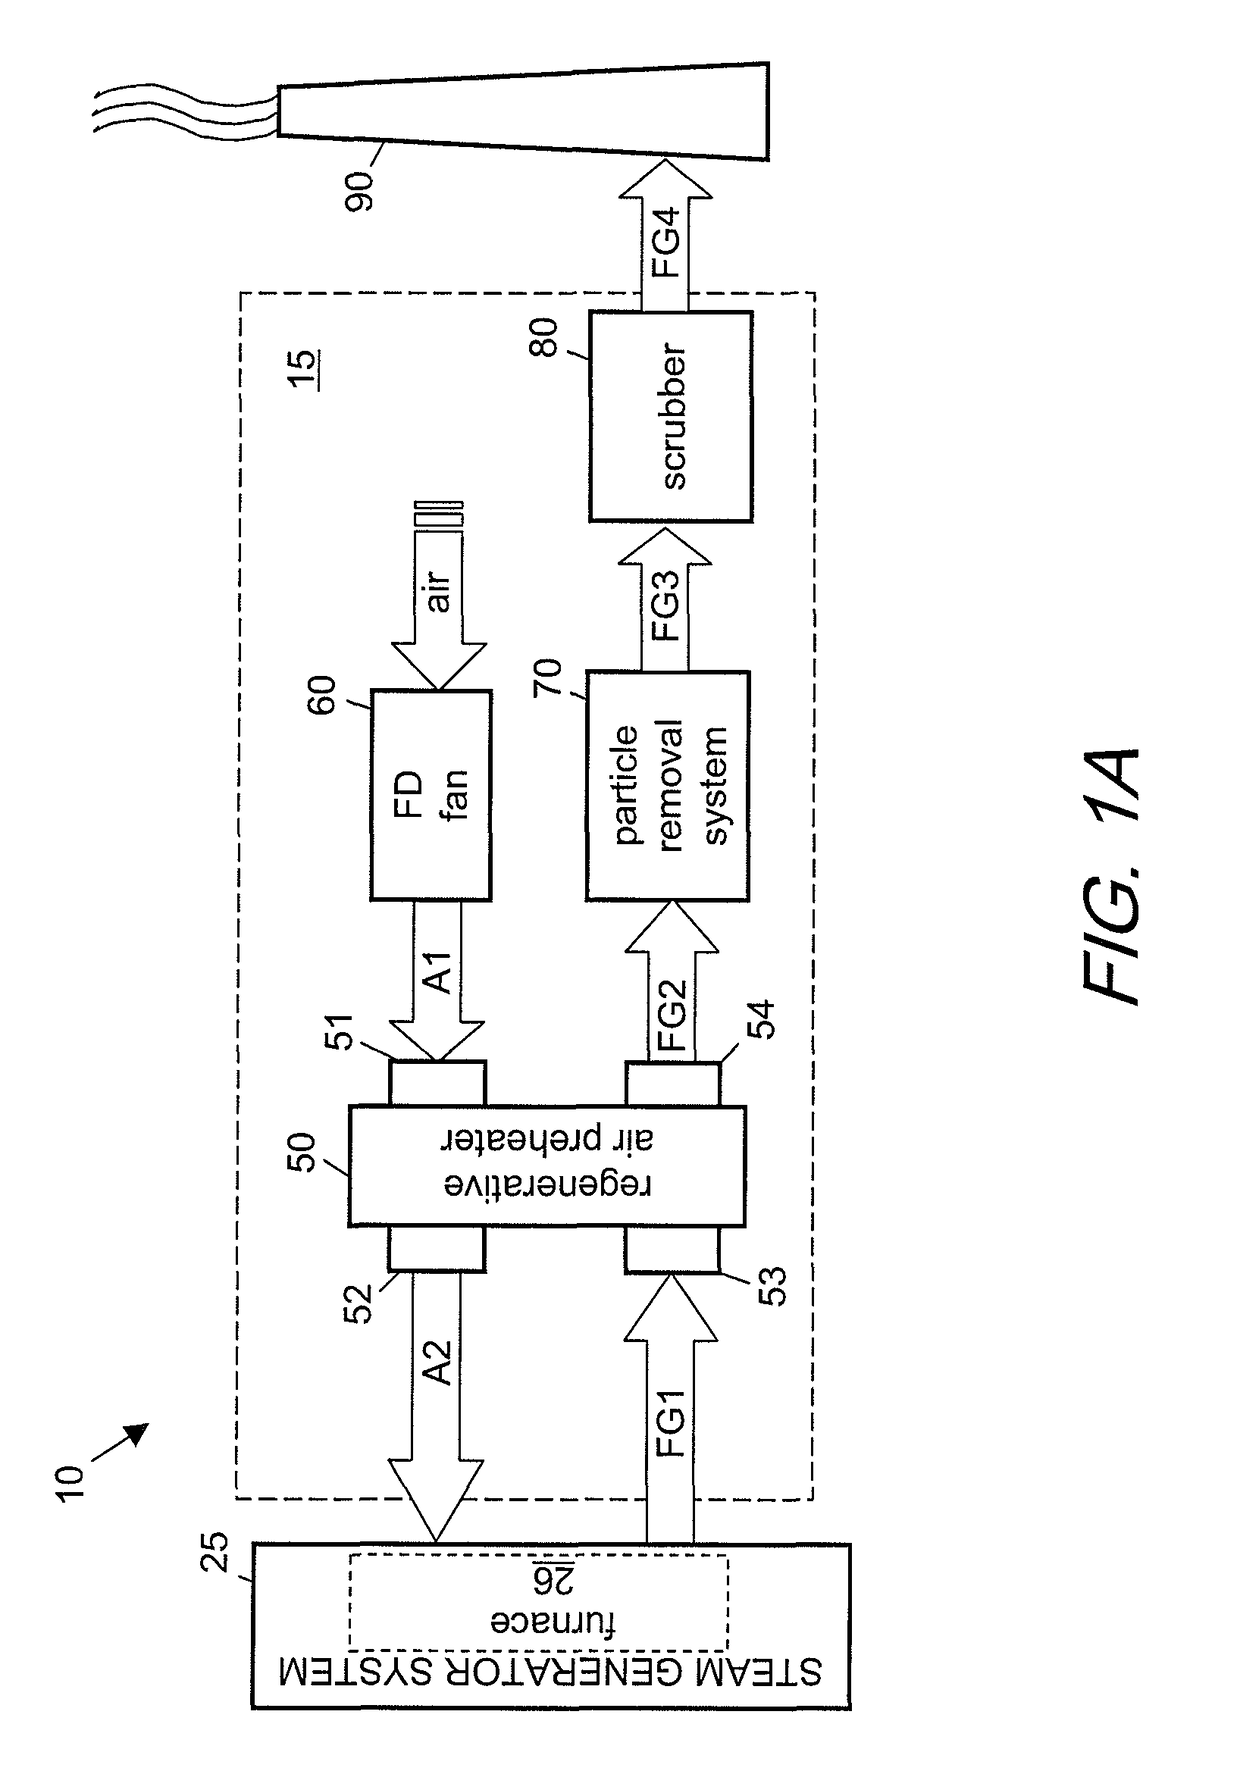 Exhaust processing and heat recovery system